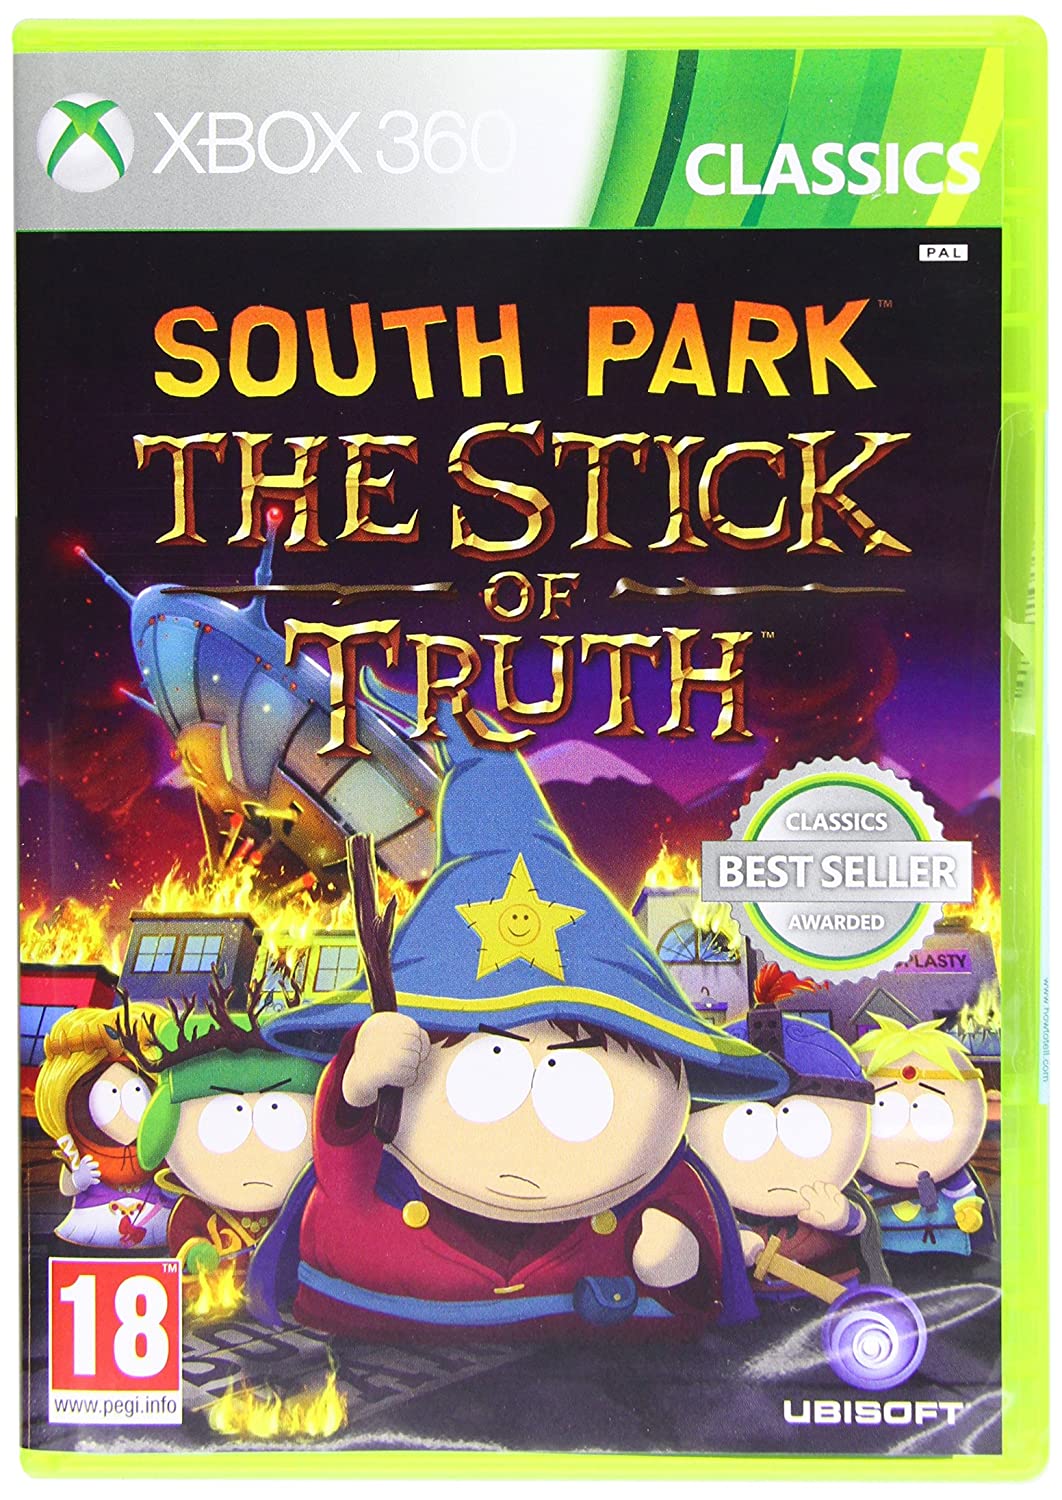 South Park The Stick of Truth (Classics)